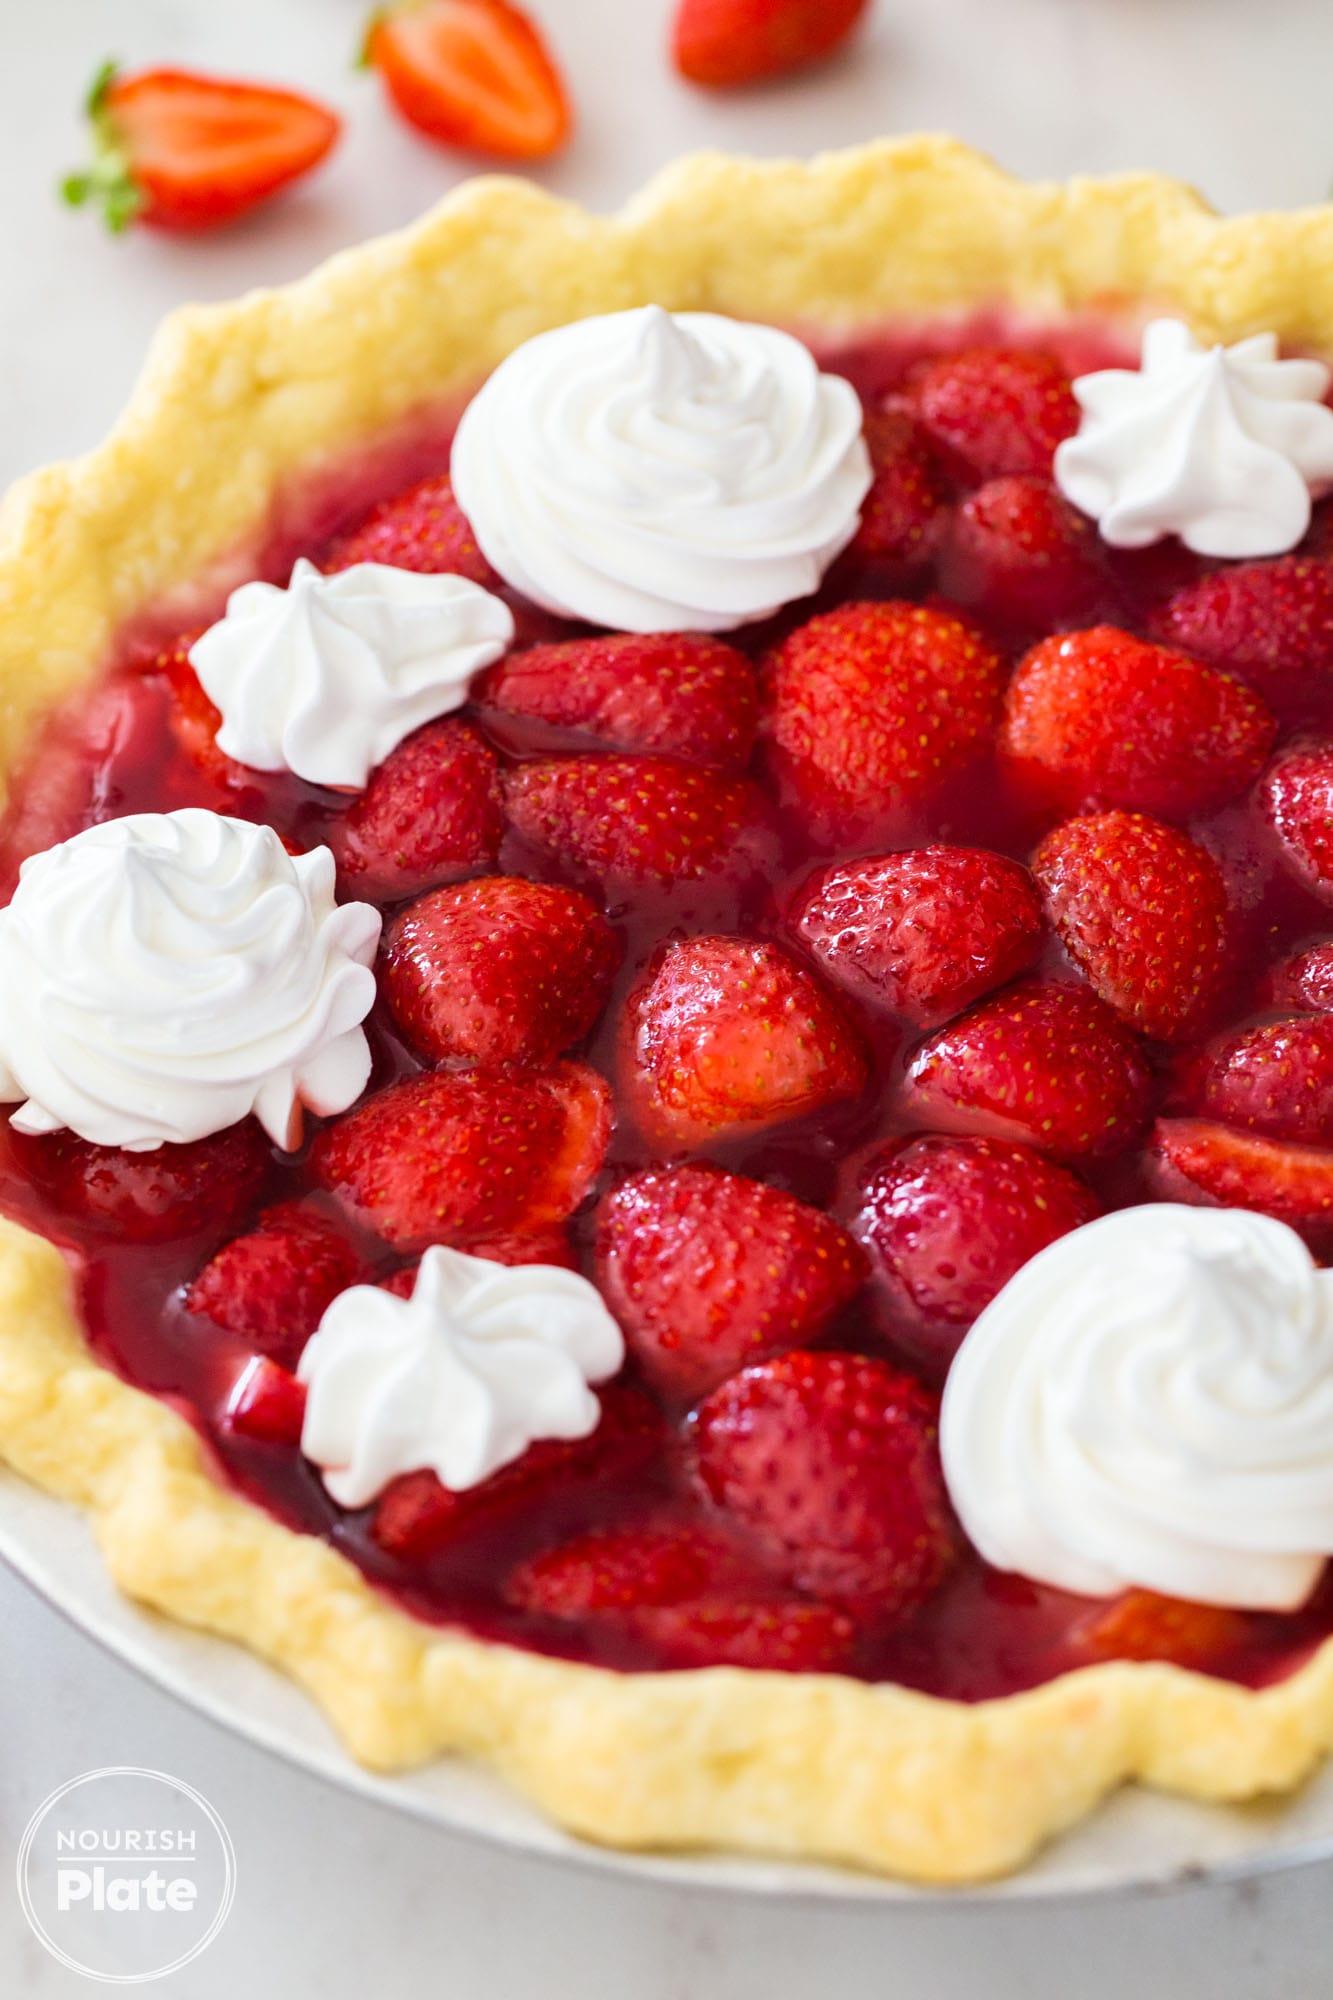 Angle shot of a fresh strawberry pie with fresh whipped cream decorations